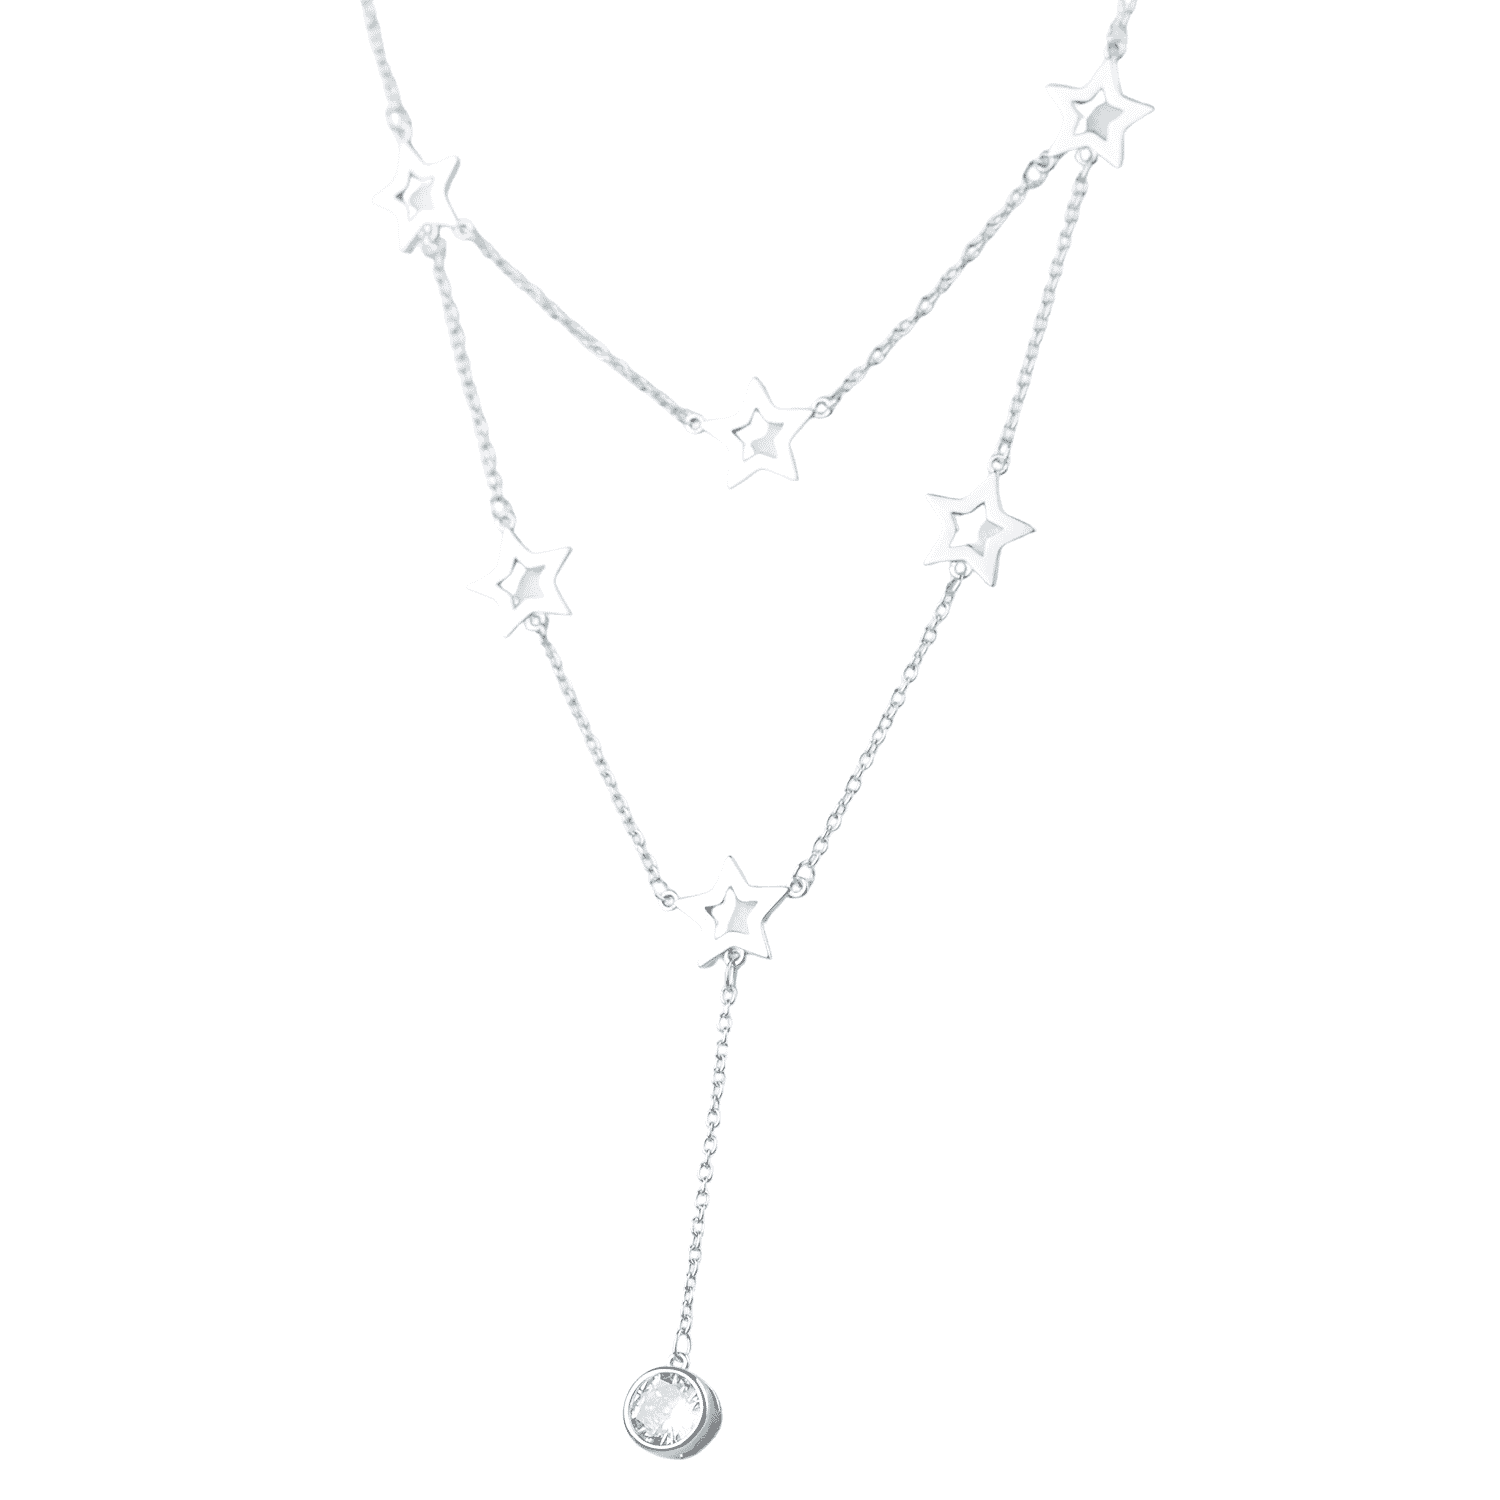 Asfour rounded Zircon Stone 925 Silver Necklace - N1908